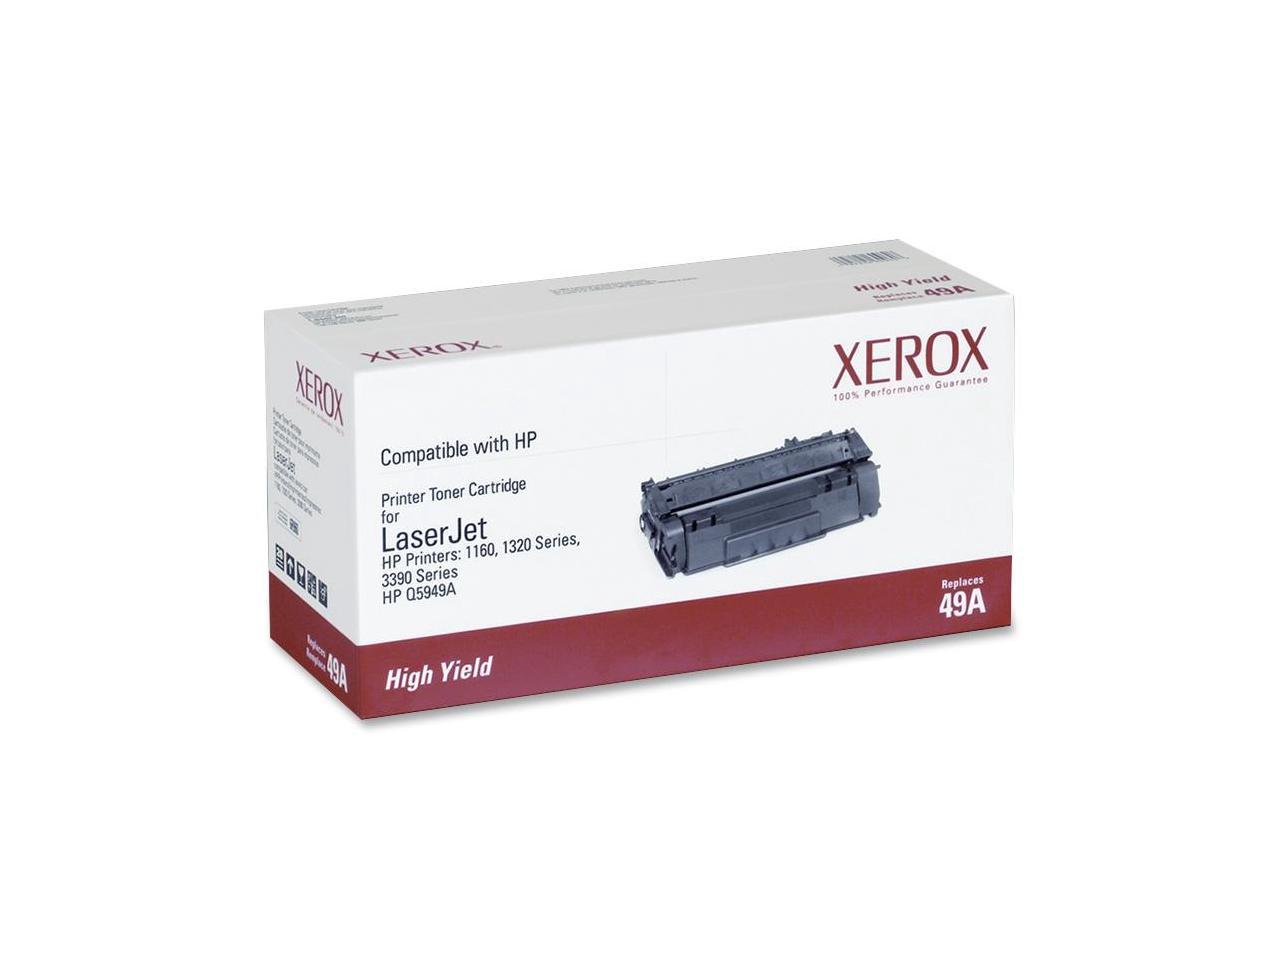 Xerox Black Compatible Cartridge 006R00960 Replacement for HP Q5949A